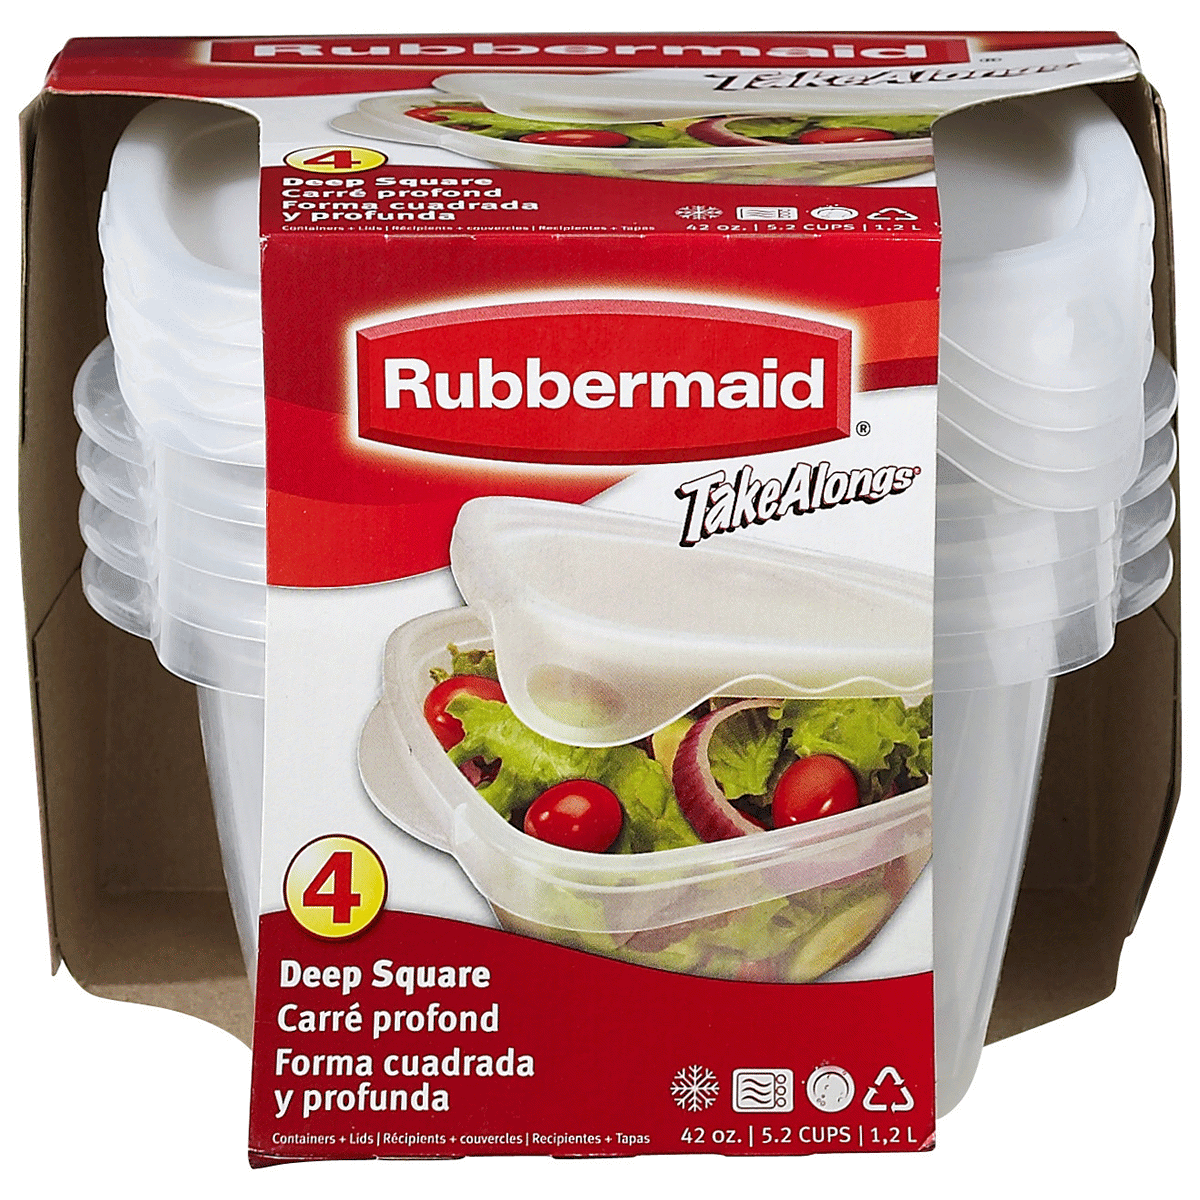 slide 1 of 9, Rubbermaid Takealongs Food Storage Containers with Easyfind Lids Clear, 4 ct; 42 oz